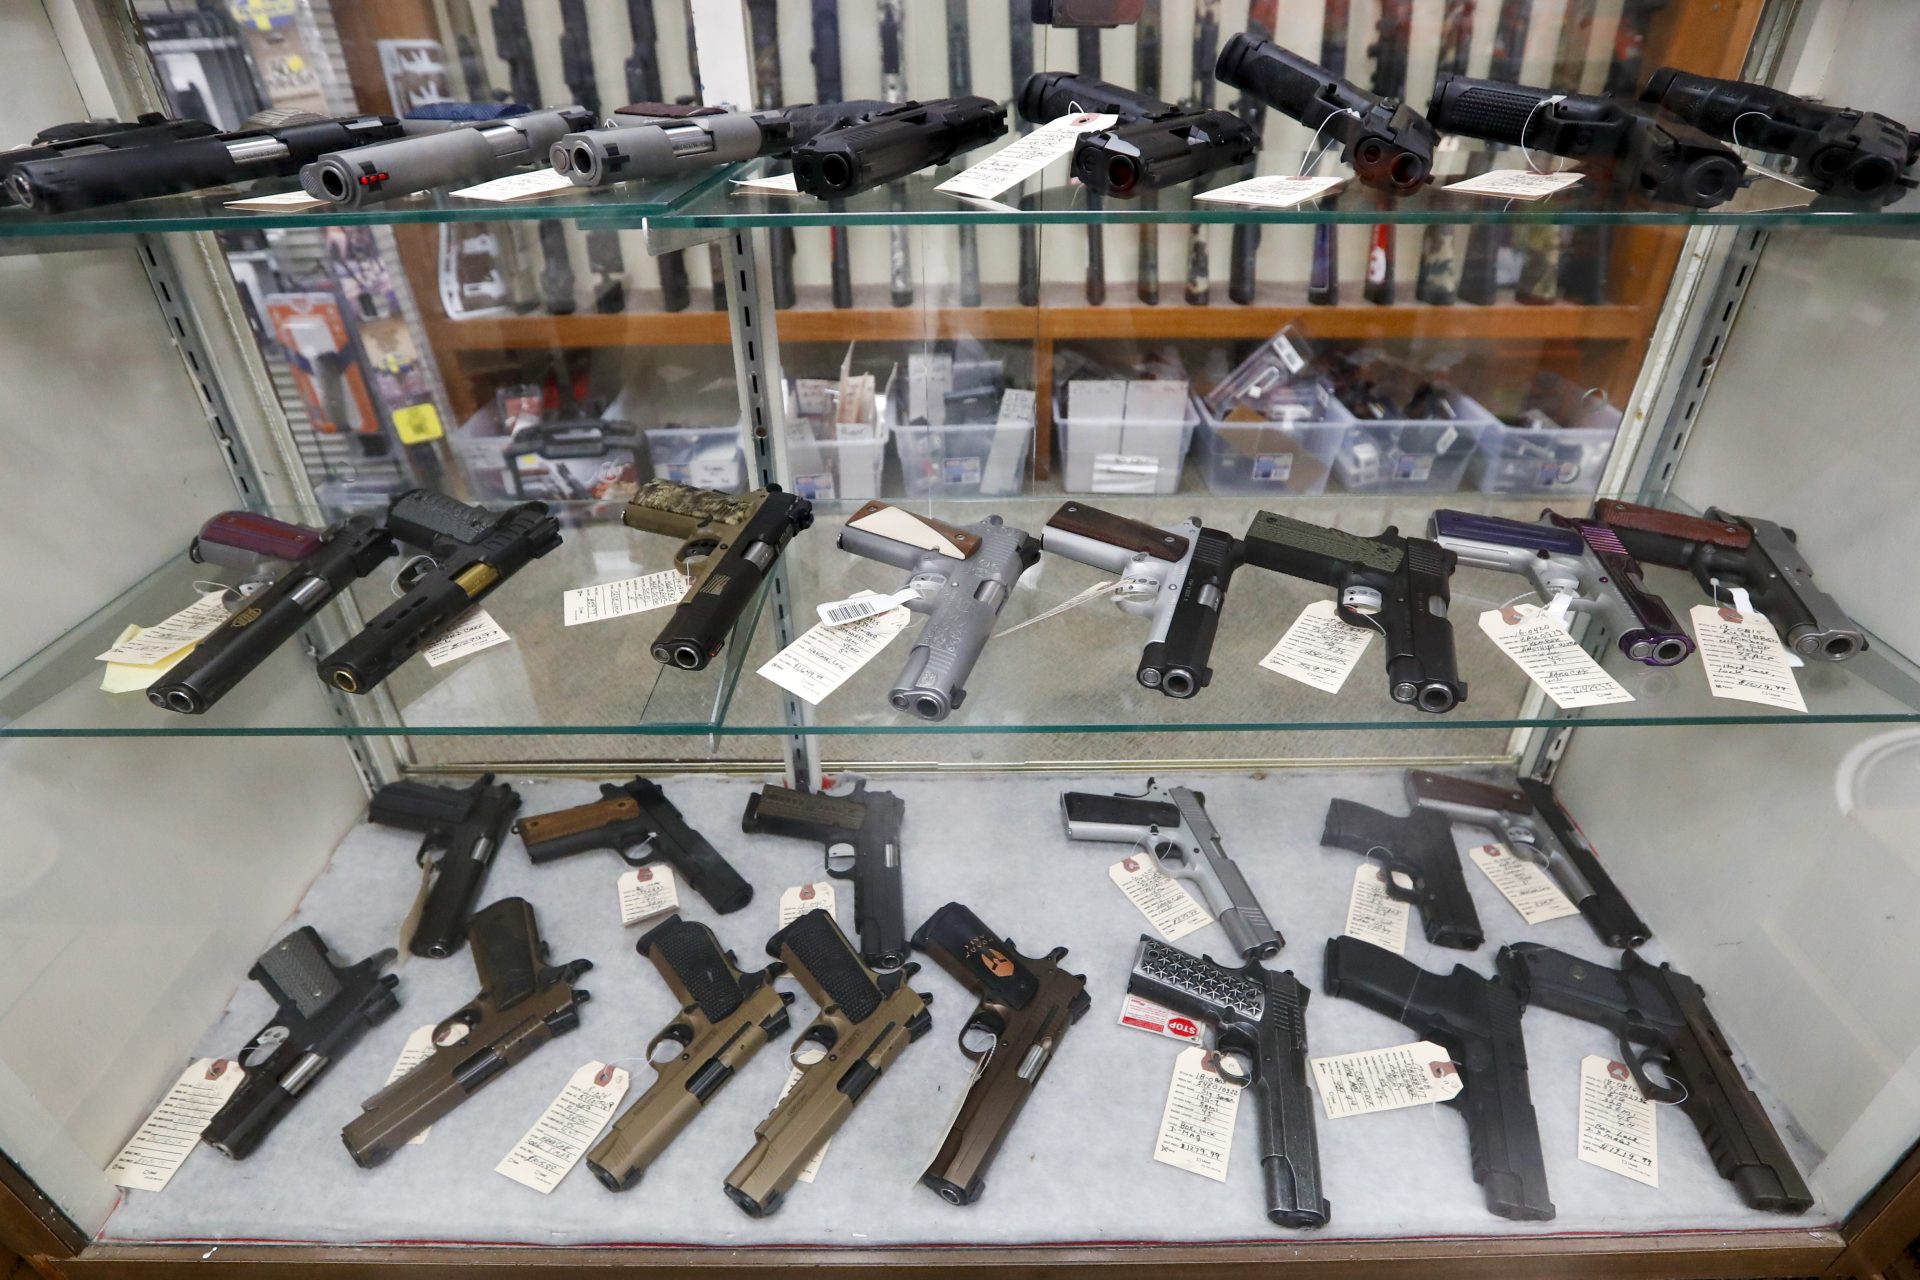 FILE PHOTO: Semi-Automatic handguns are displayed at Duke's Sport Shop, Wednesday, March 25, 2020, in New Castle, Pa.